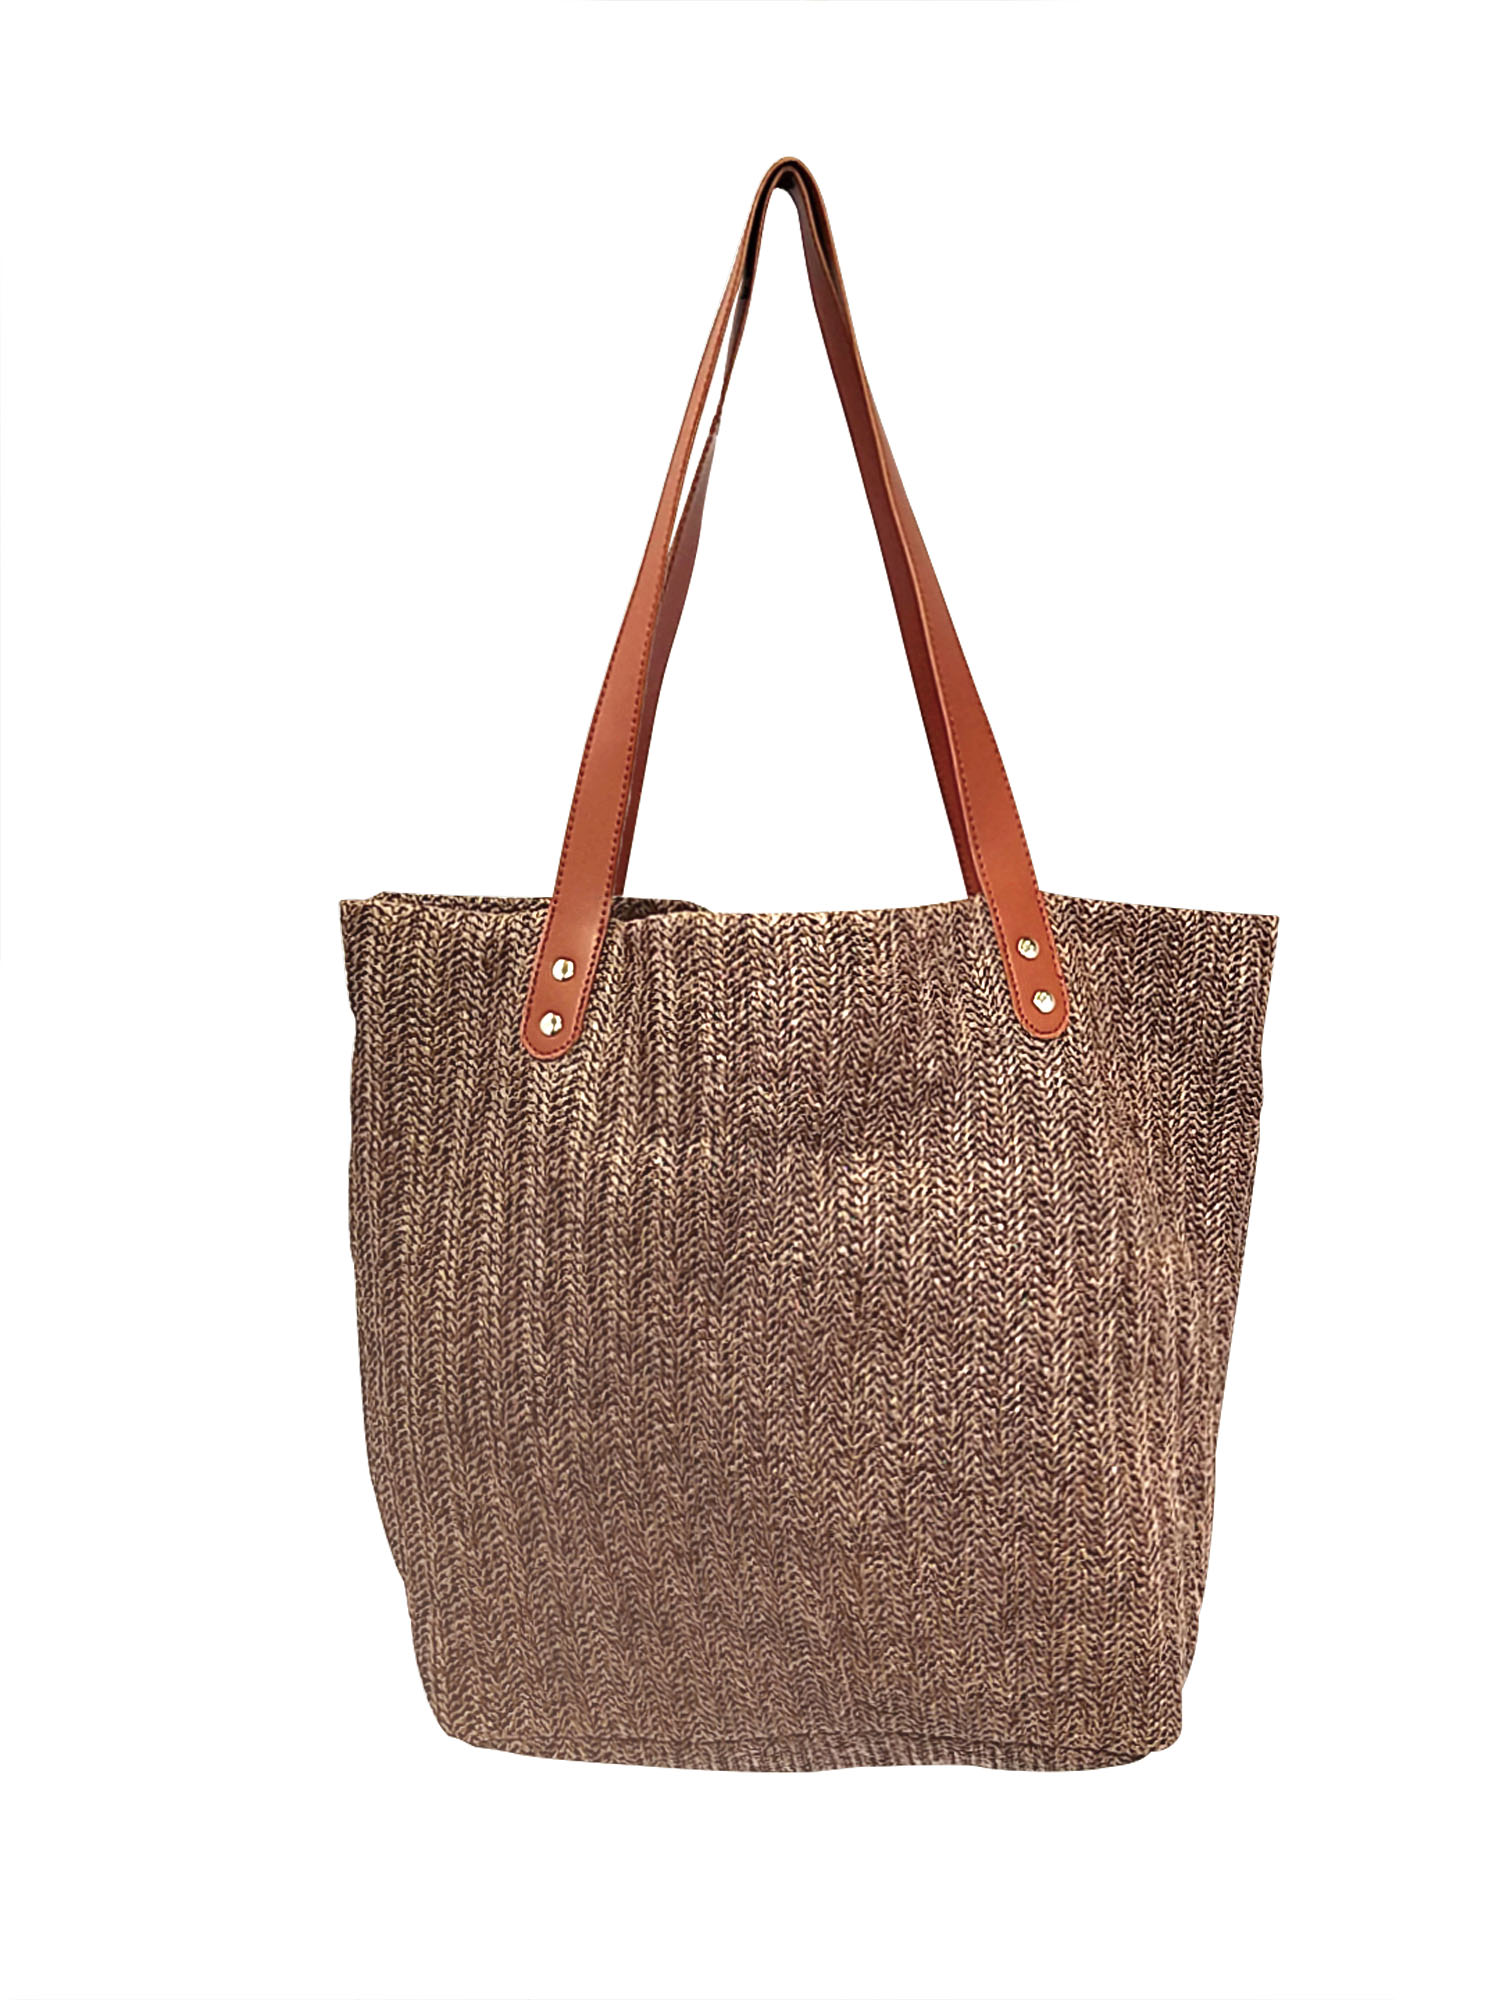 Knitted tote bag brown